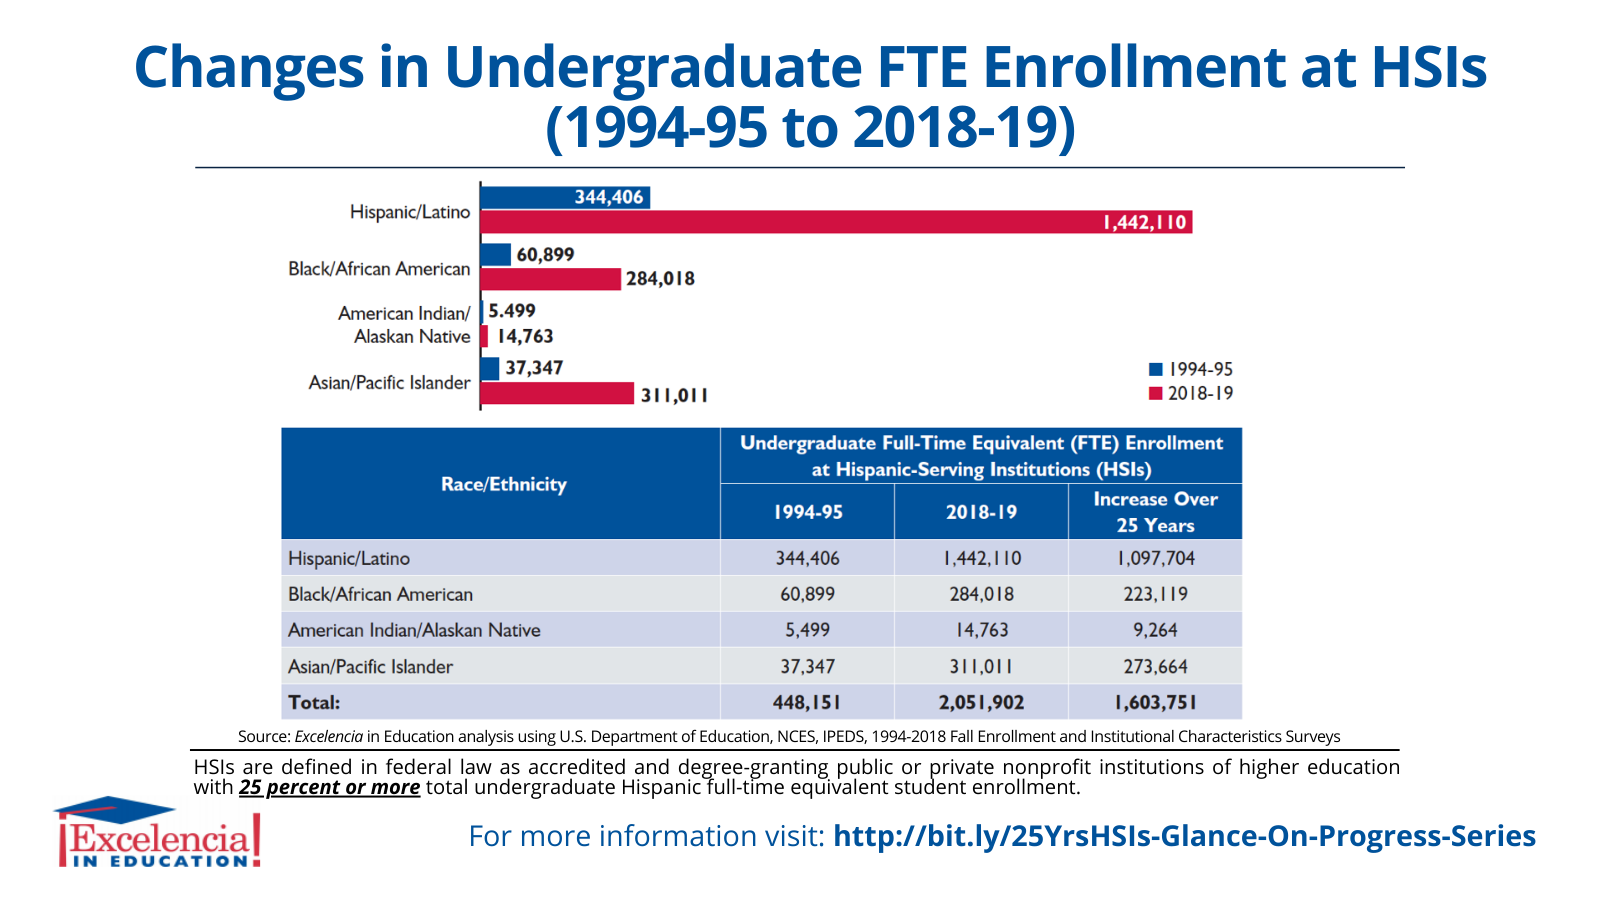 Infographic-Changes in Undergraduate FTE Enrollment at HSIs 1994-95 to 2018-19